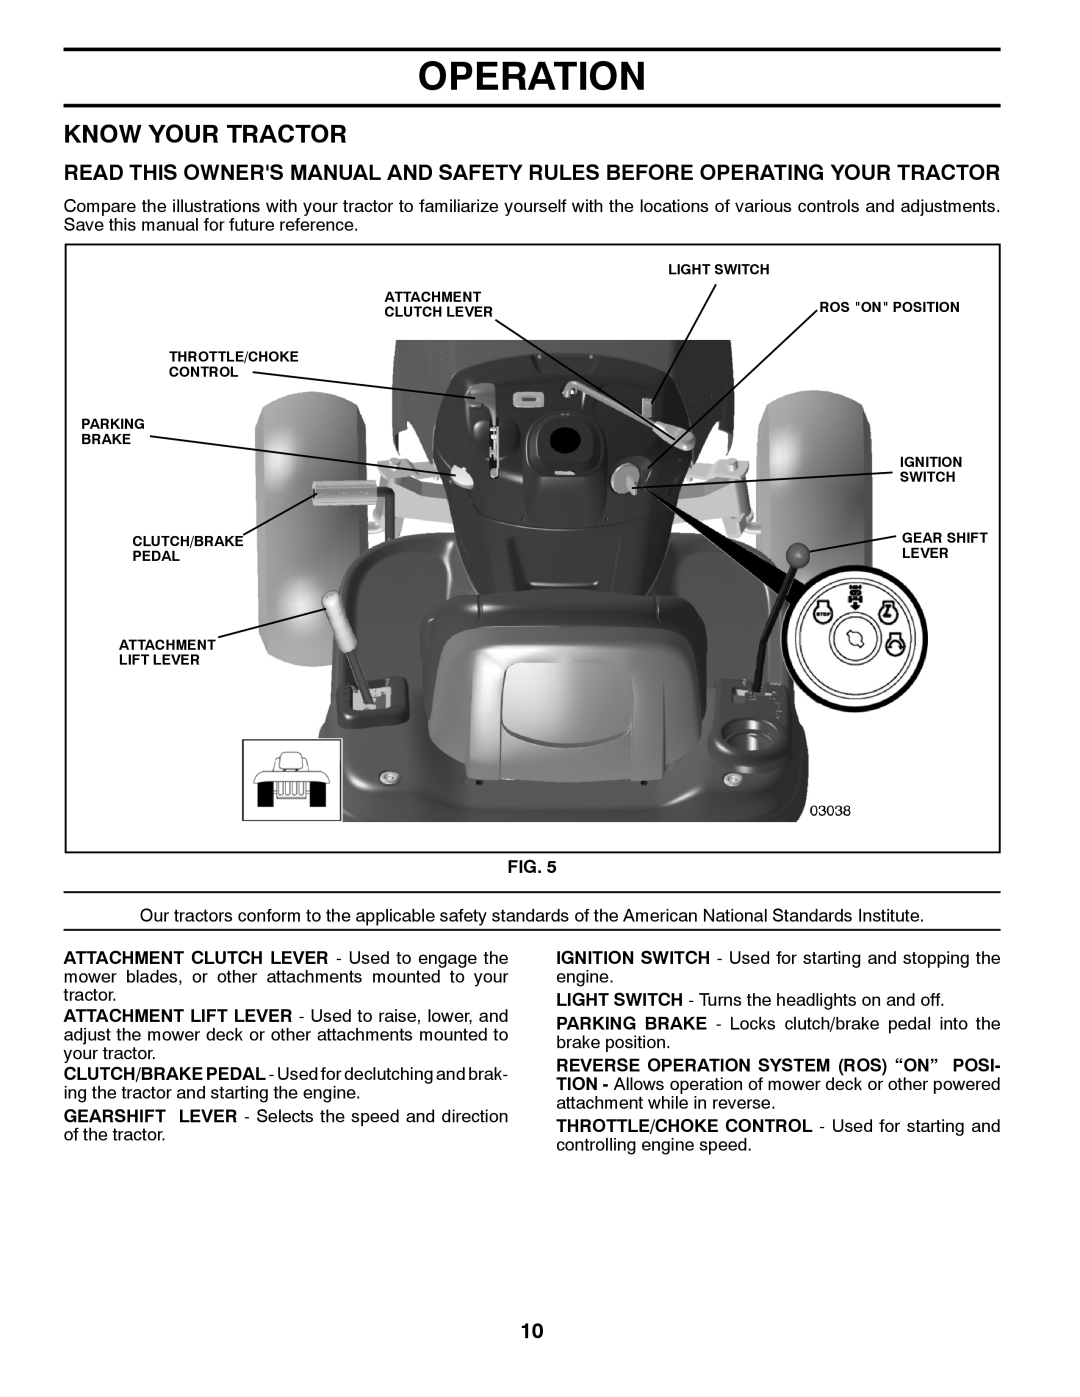 Poulan 96042002400 owner manual Know Your Tractor, Operation 